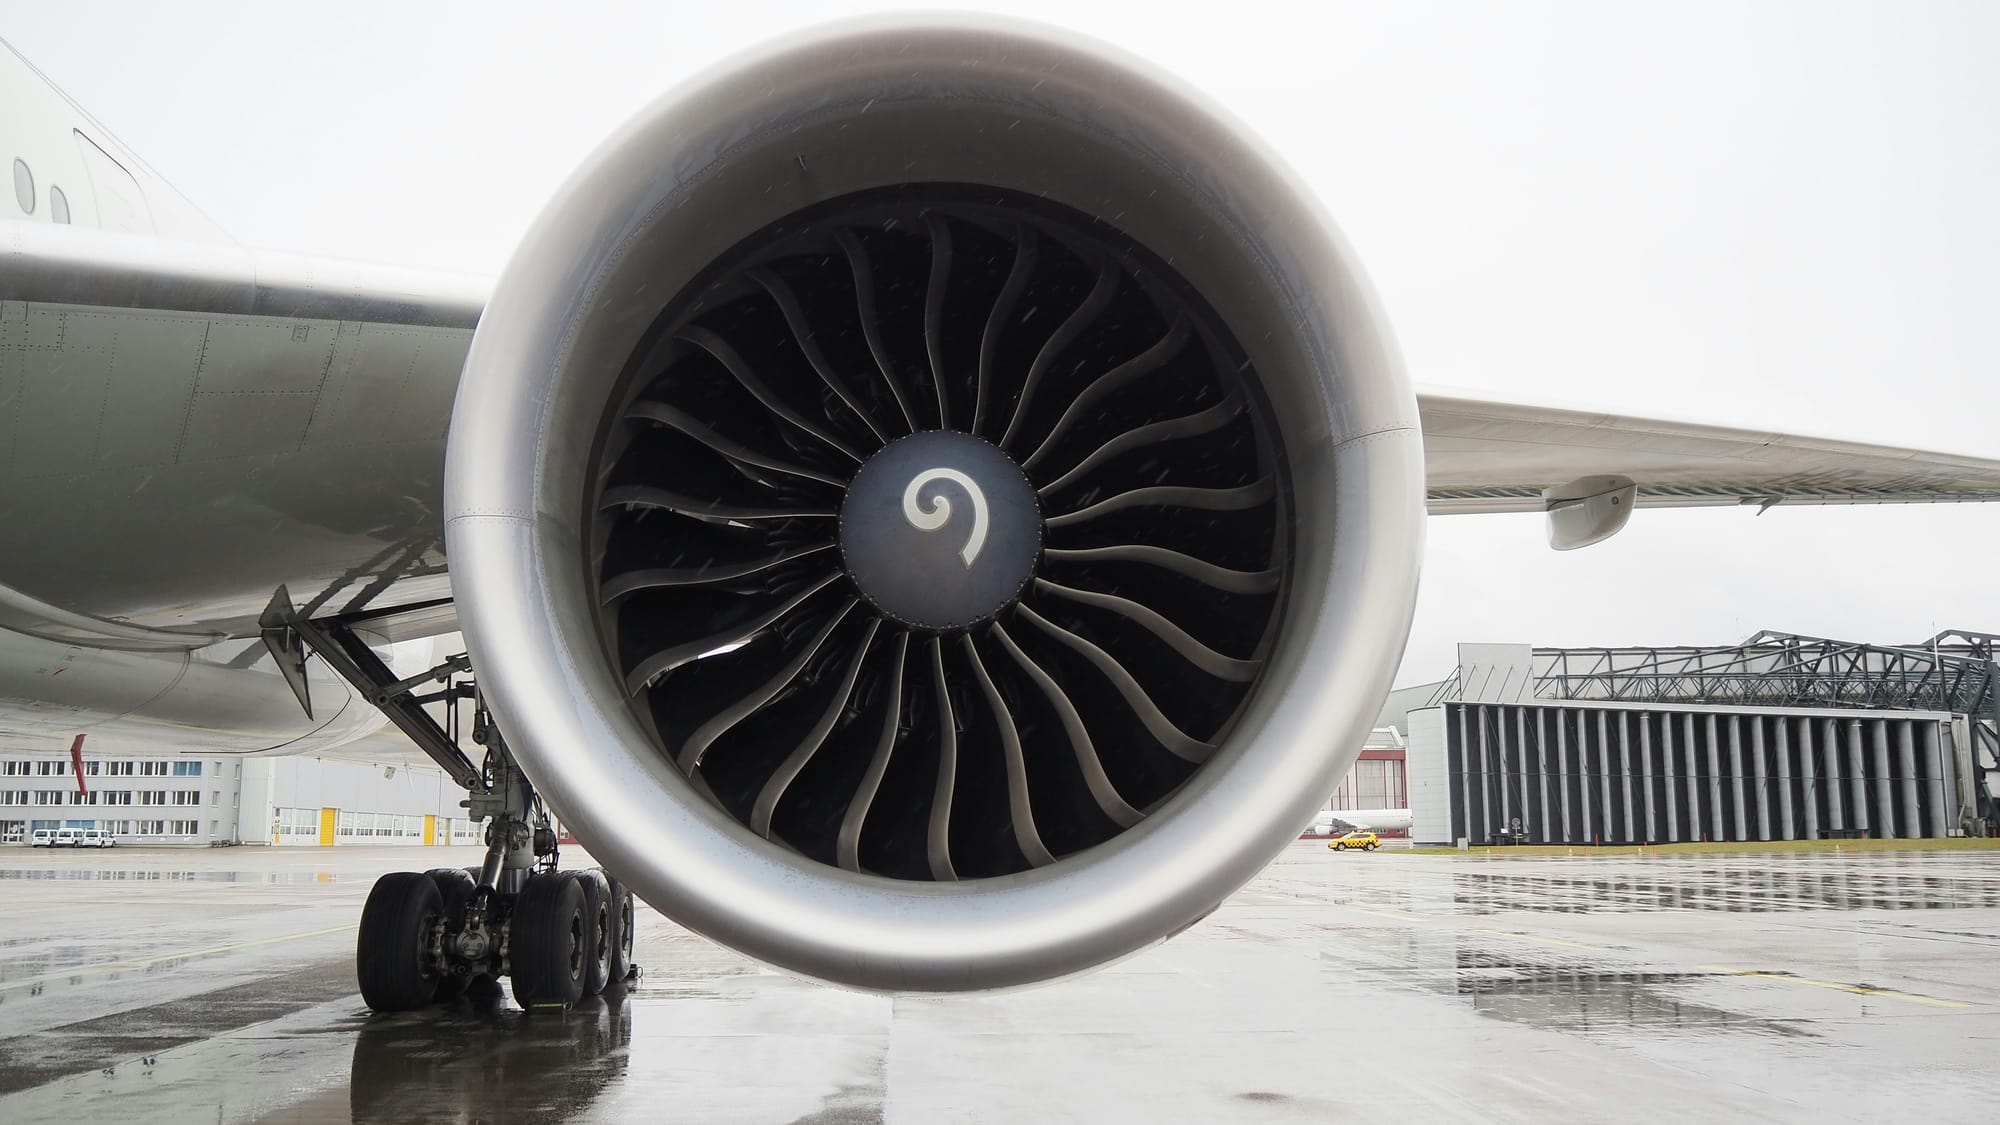 How Commercial Jet Engines Can Sustain Flight on One Engine